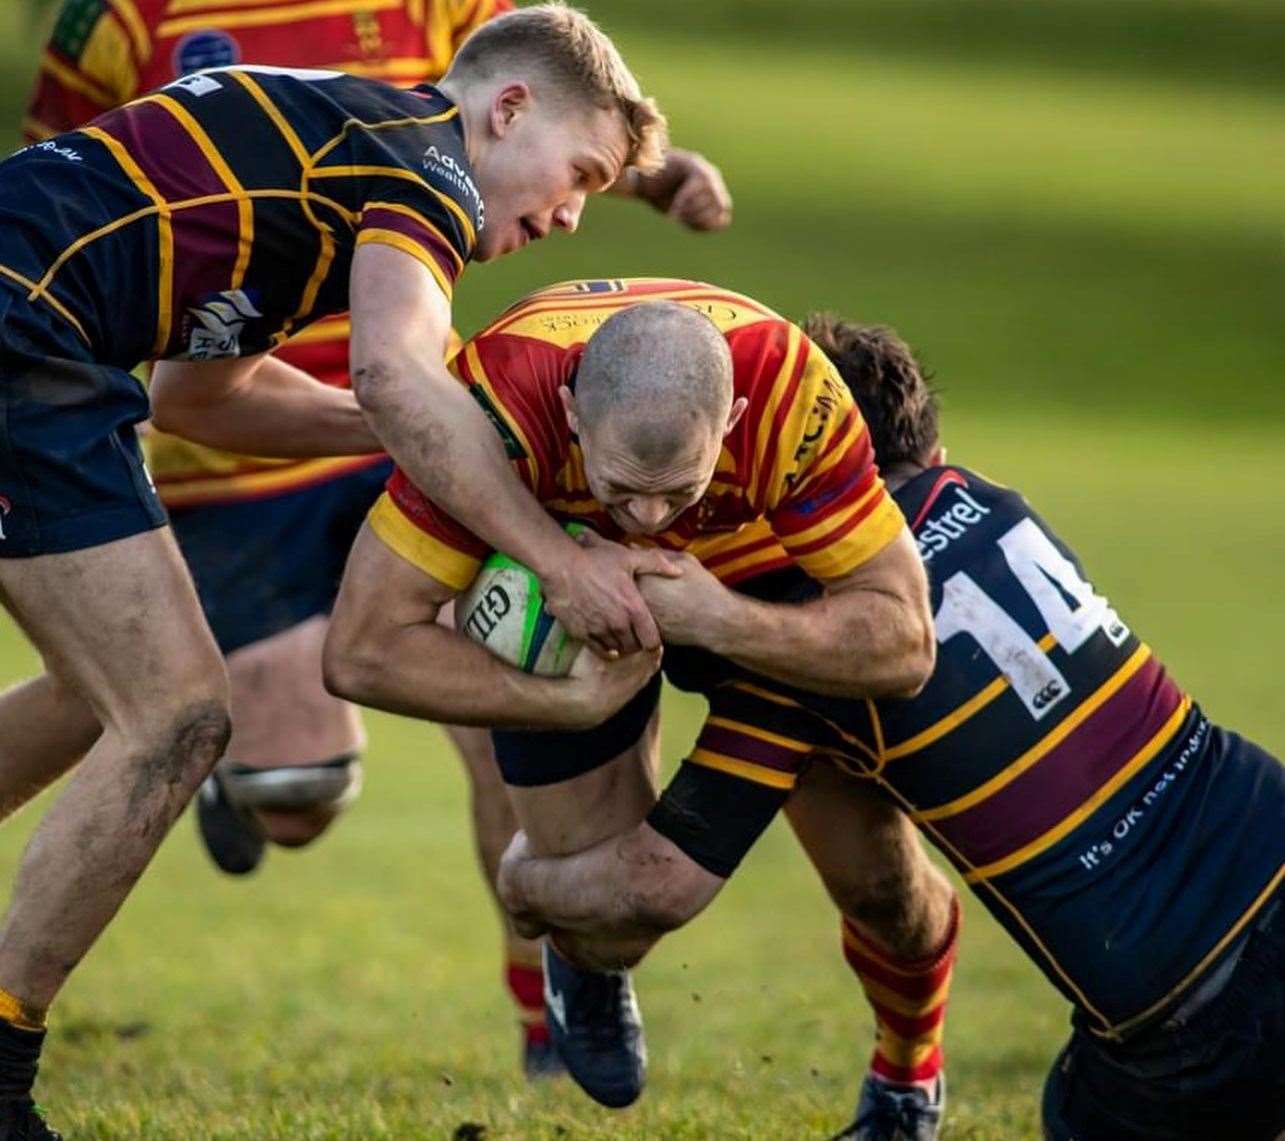 Charlie Wardzynski in action for Medway against Old Colfeians. Picture: Jake Miles